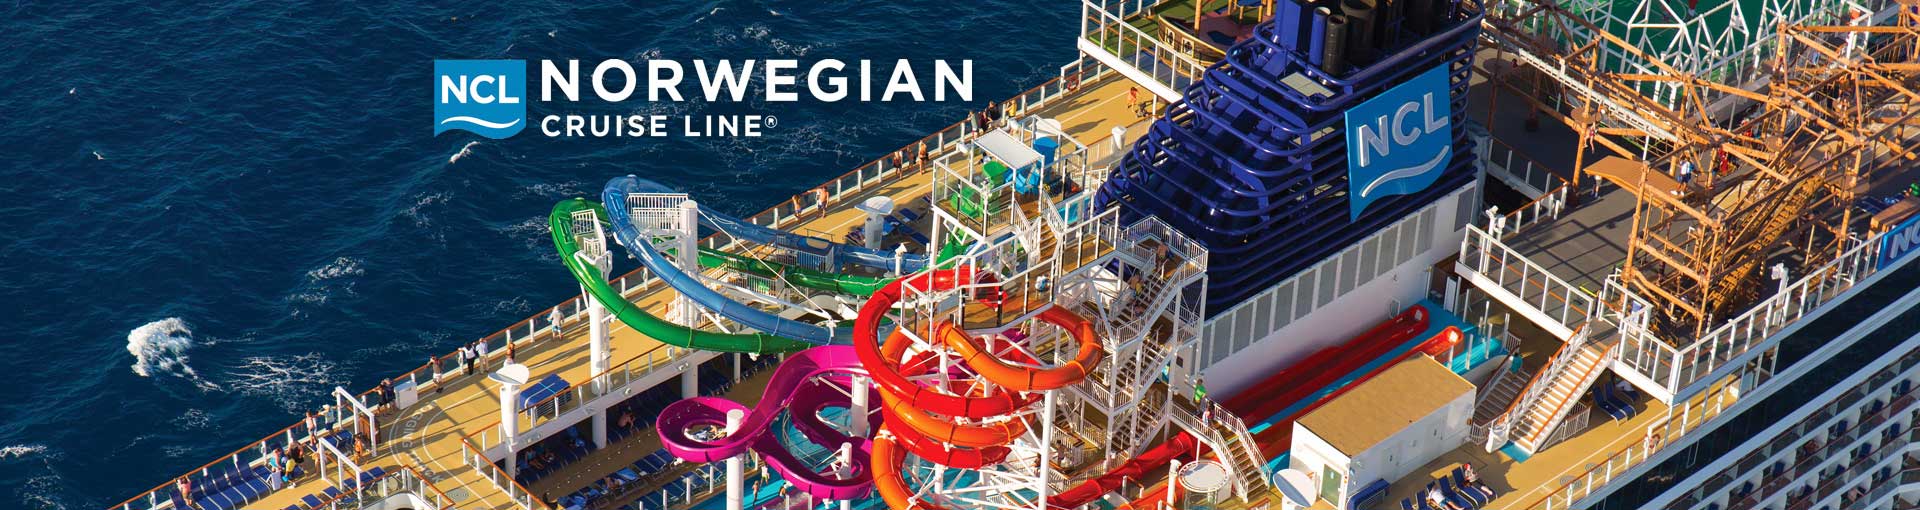 Already Booked With Norwegian Cruise Line